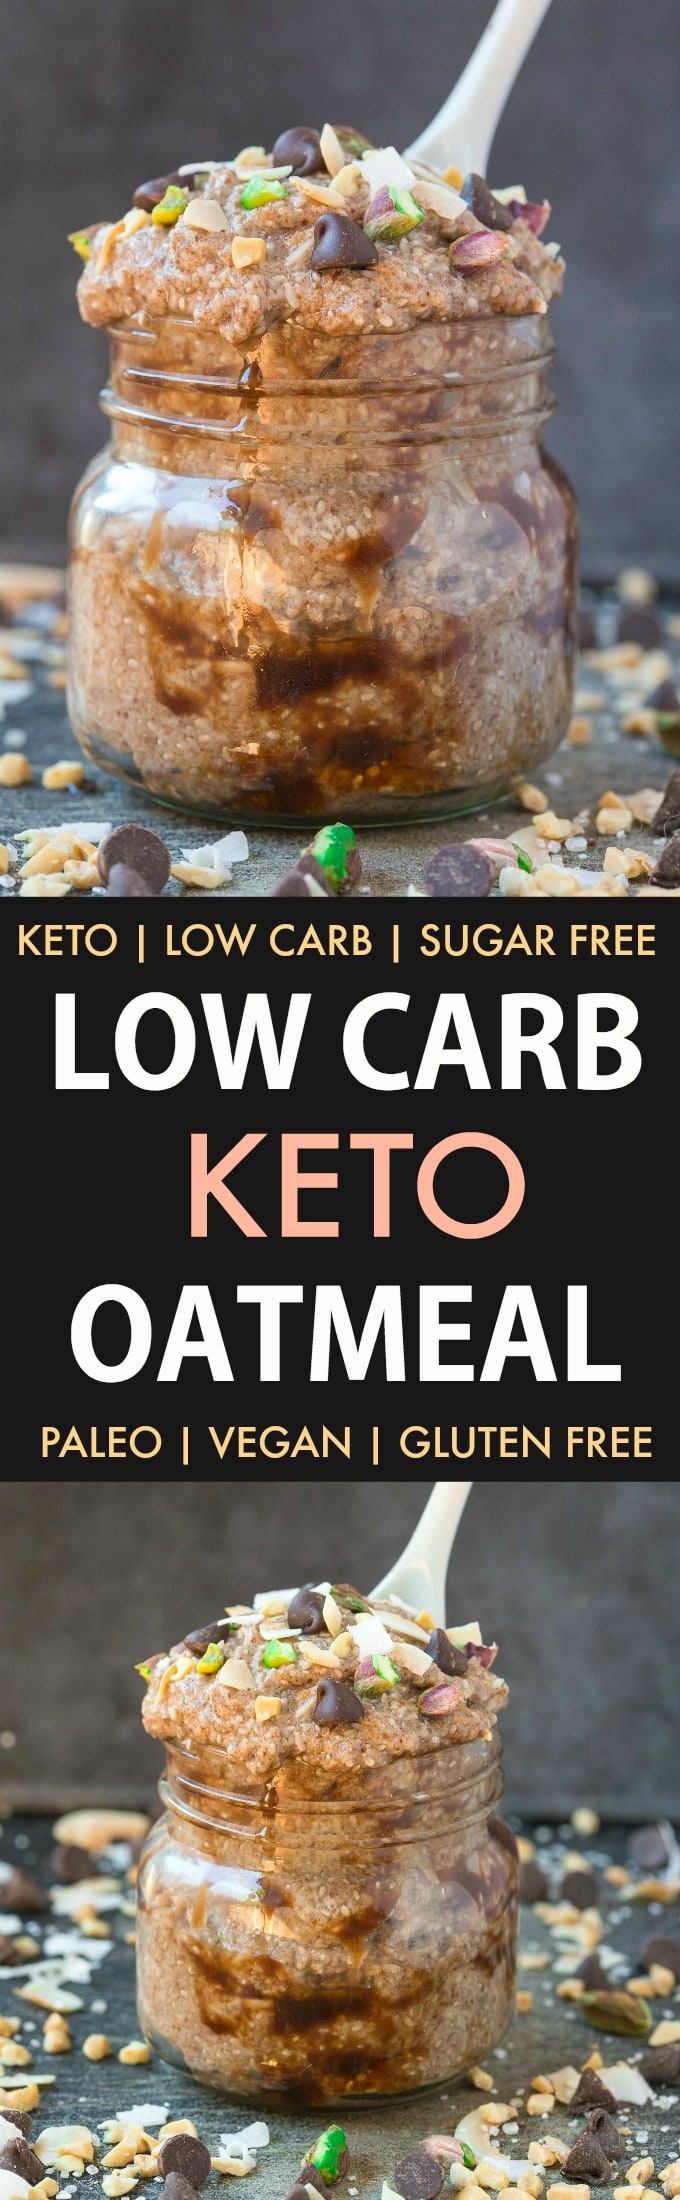 Low Carb Keto Oatmeal (Paleo, Vegan, Gluten Free)- An easy recipe for instant or overnight keto oatmeal made with flaxmeal, chia seeds and coconut- The perfect sugar-free ketogenic breakfast! #oatlessoats #overnightoats #lowcarb #ketogenicbreakfast #ketobreakfast #ketosis | Recipe on thebigmansworld.com